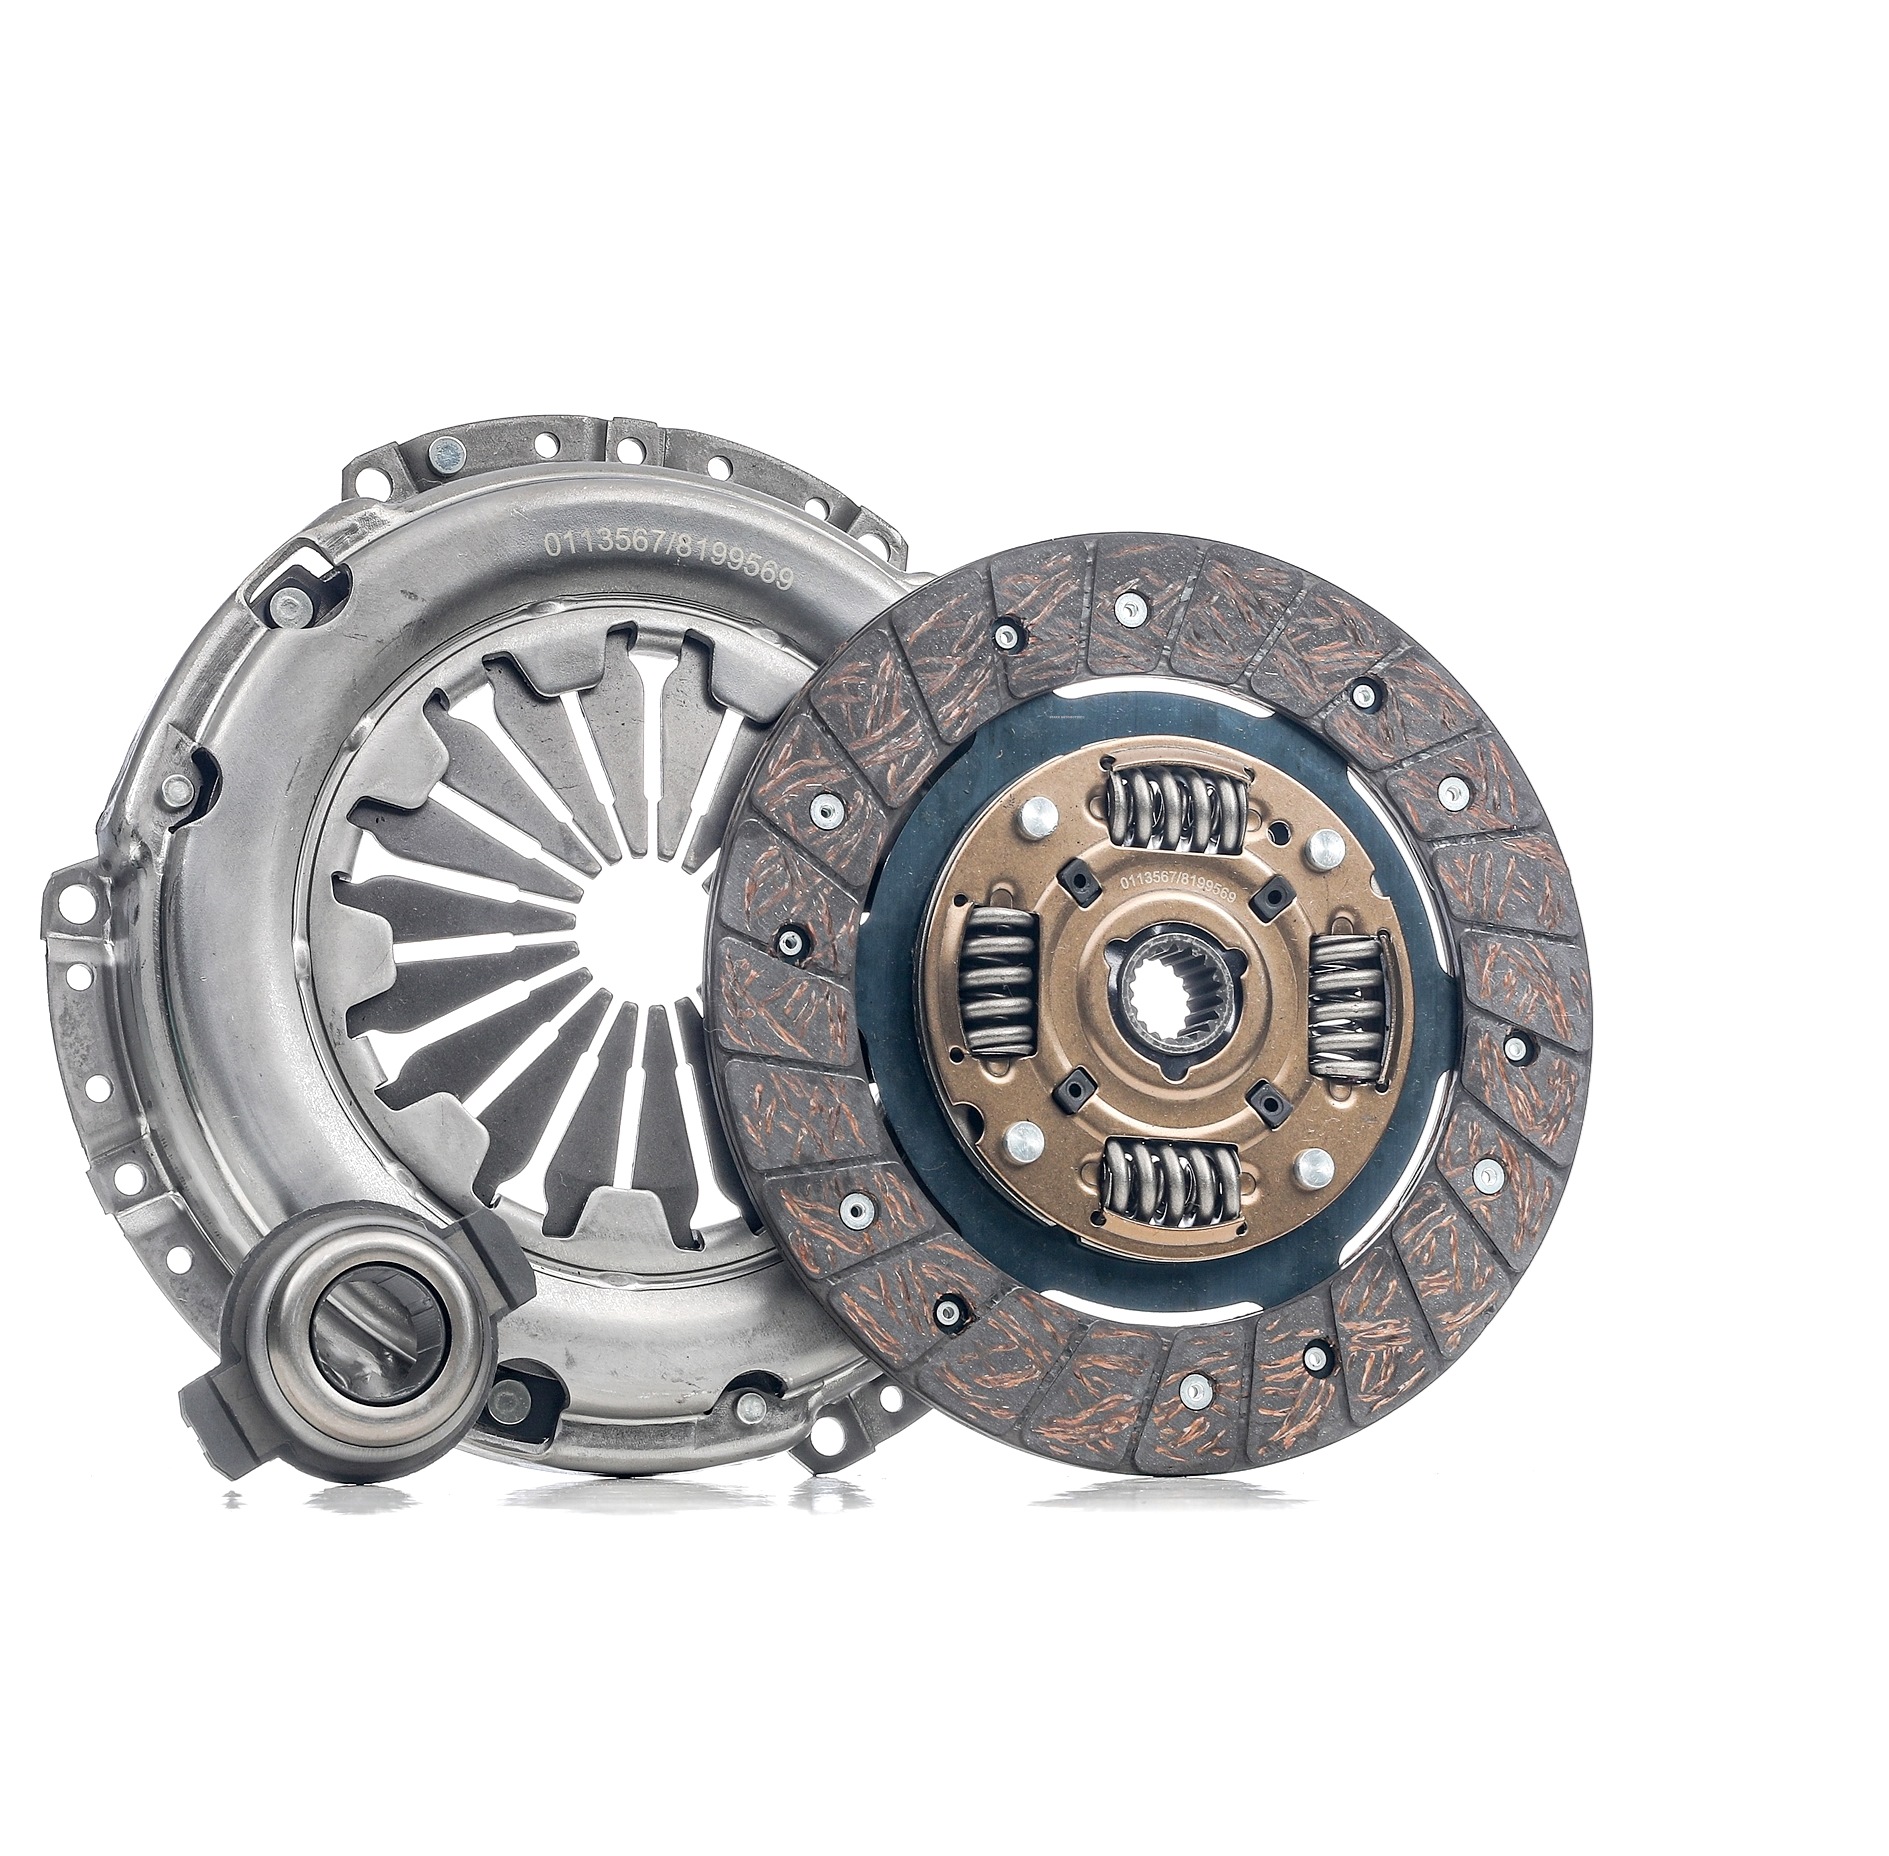 STARK SKCK-0100185 Clutch kit three-piece, with clutch release bearing